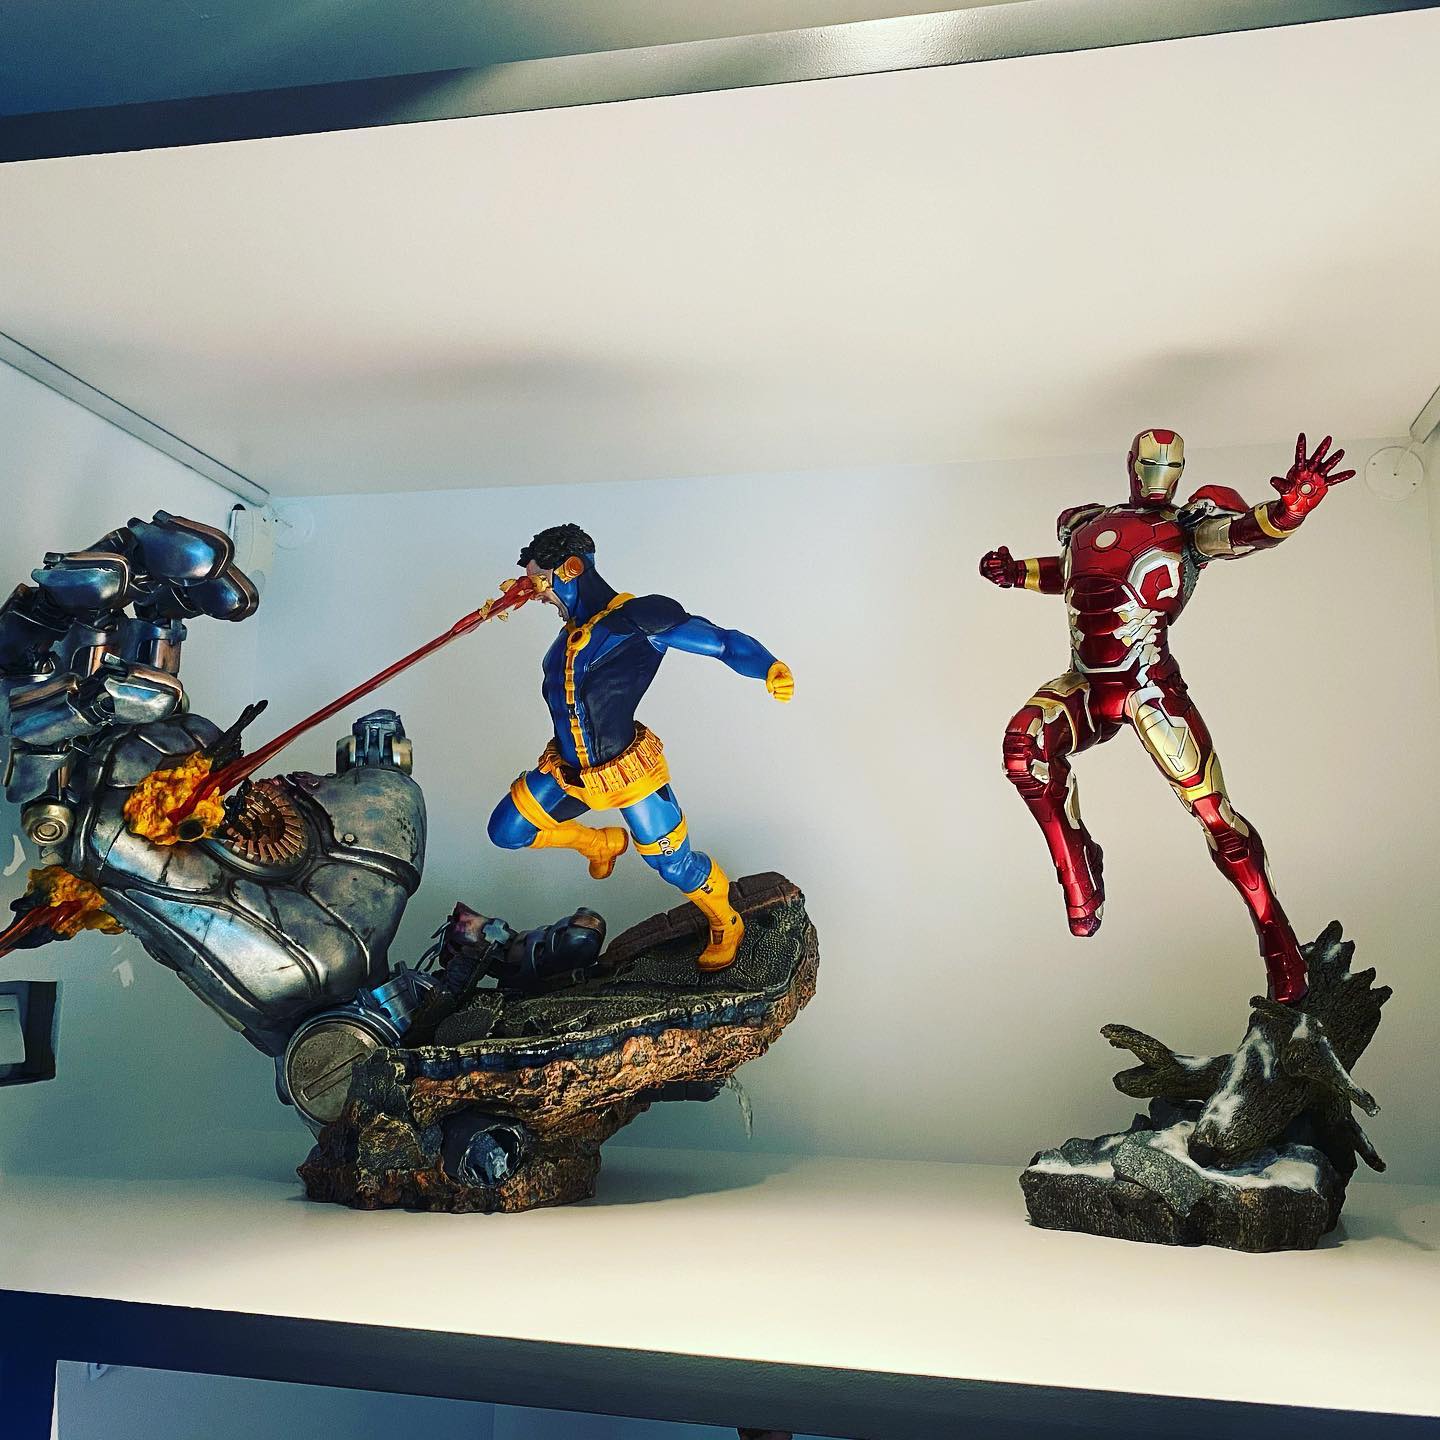 Finally got Iron Man setup, it’s been inside the box for a while, it was time to display it 😀